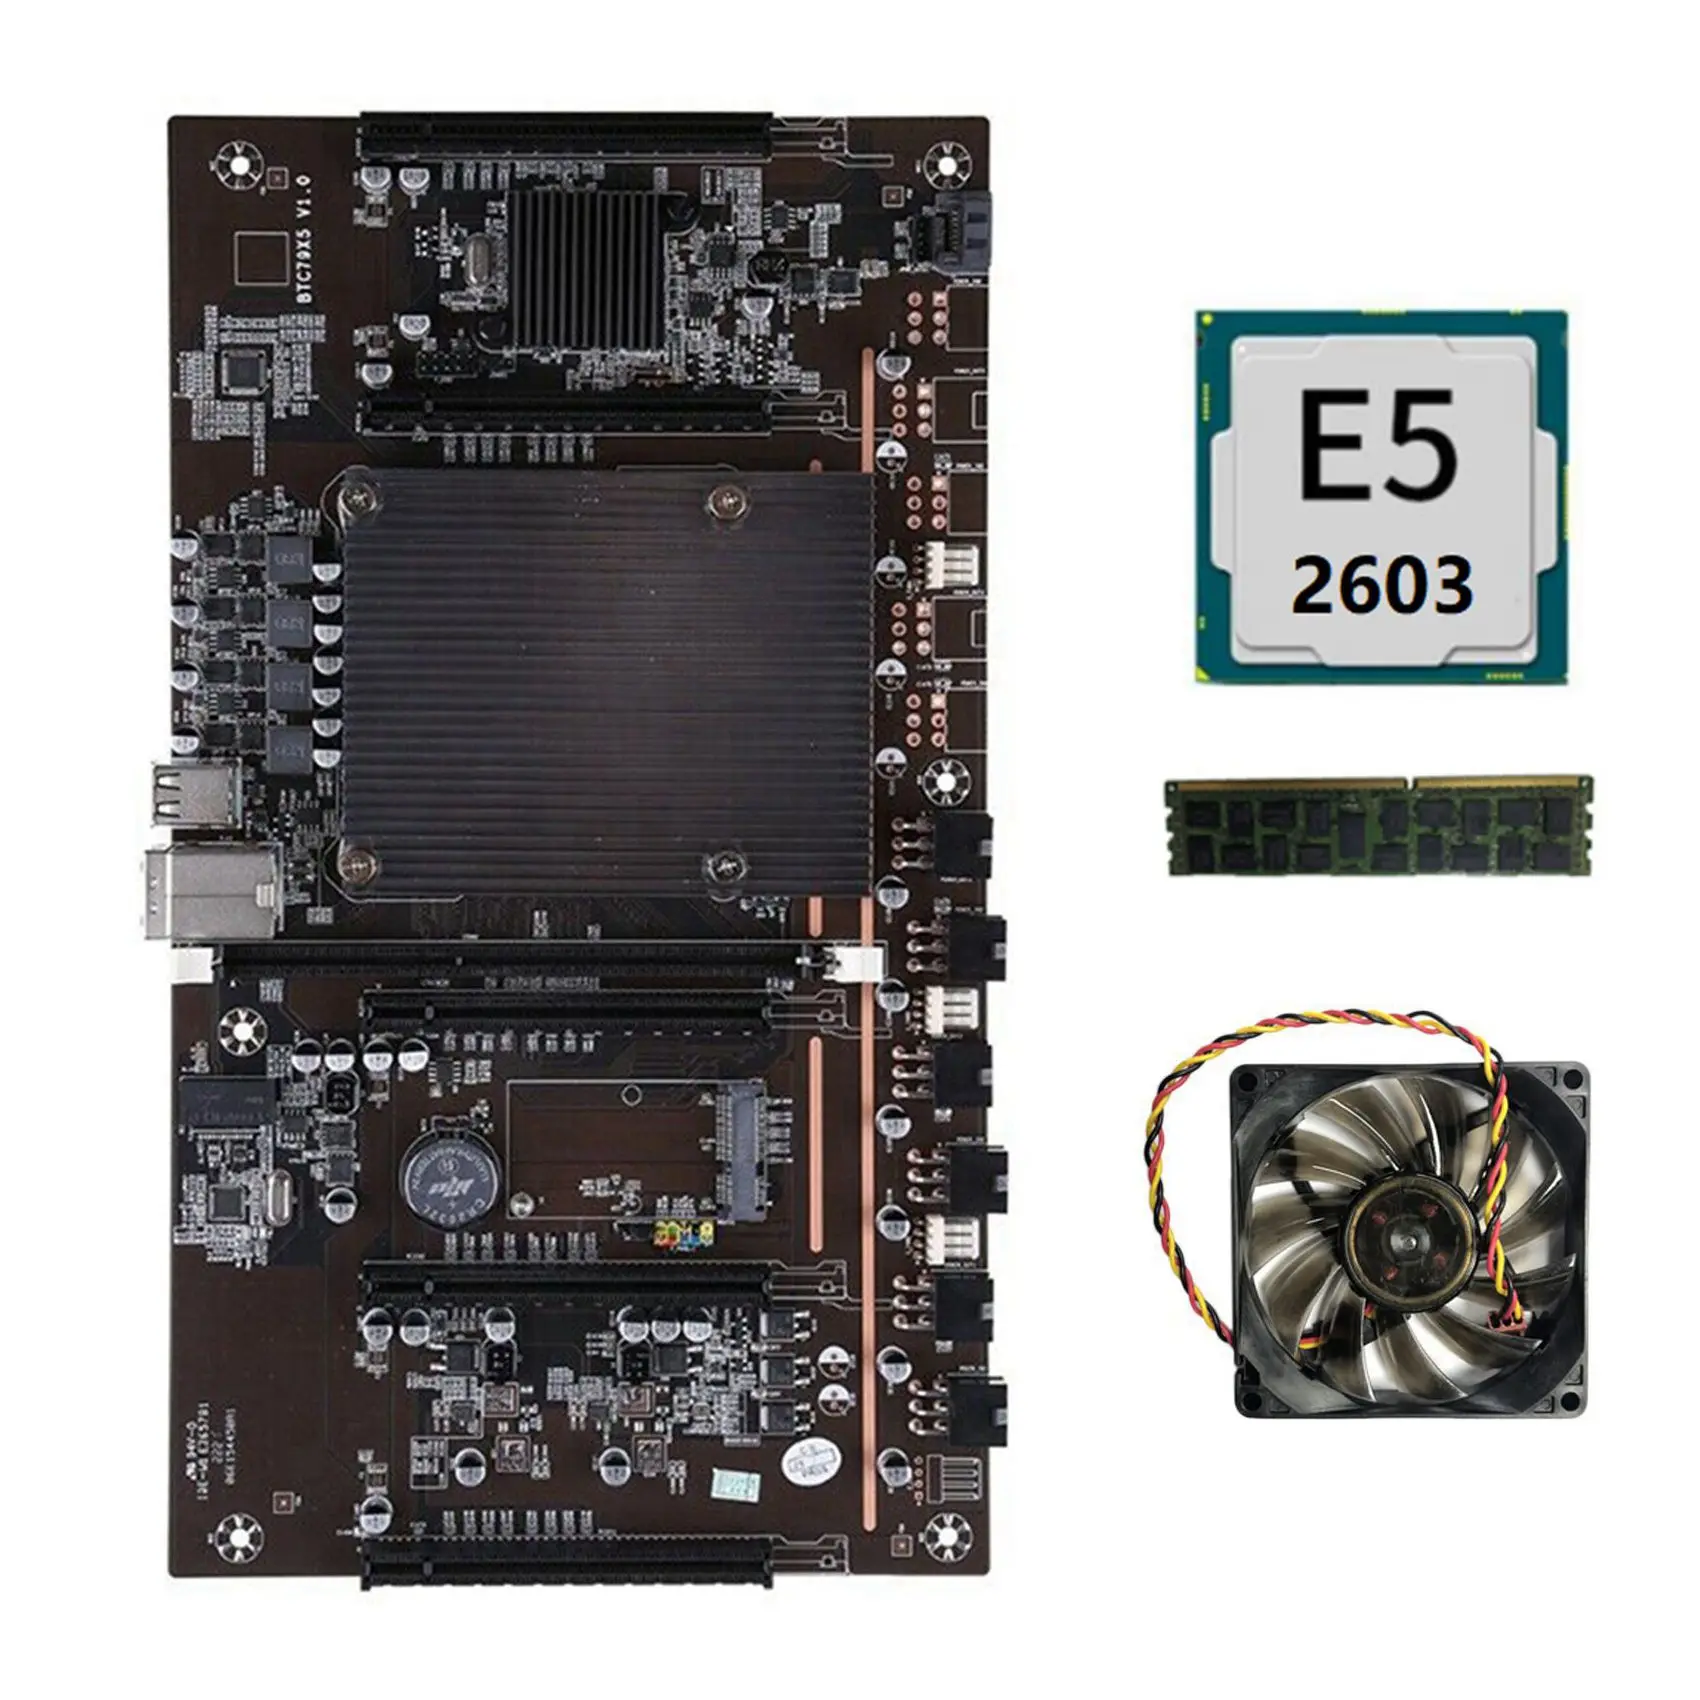 

X79 H61 BTC Miner Motherboard LGA 2011 Support 3060 3070 3080 Graphics Card with E5 2603 CPU+RECC 4G DDR3 RAM+Fan